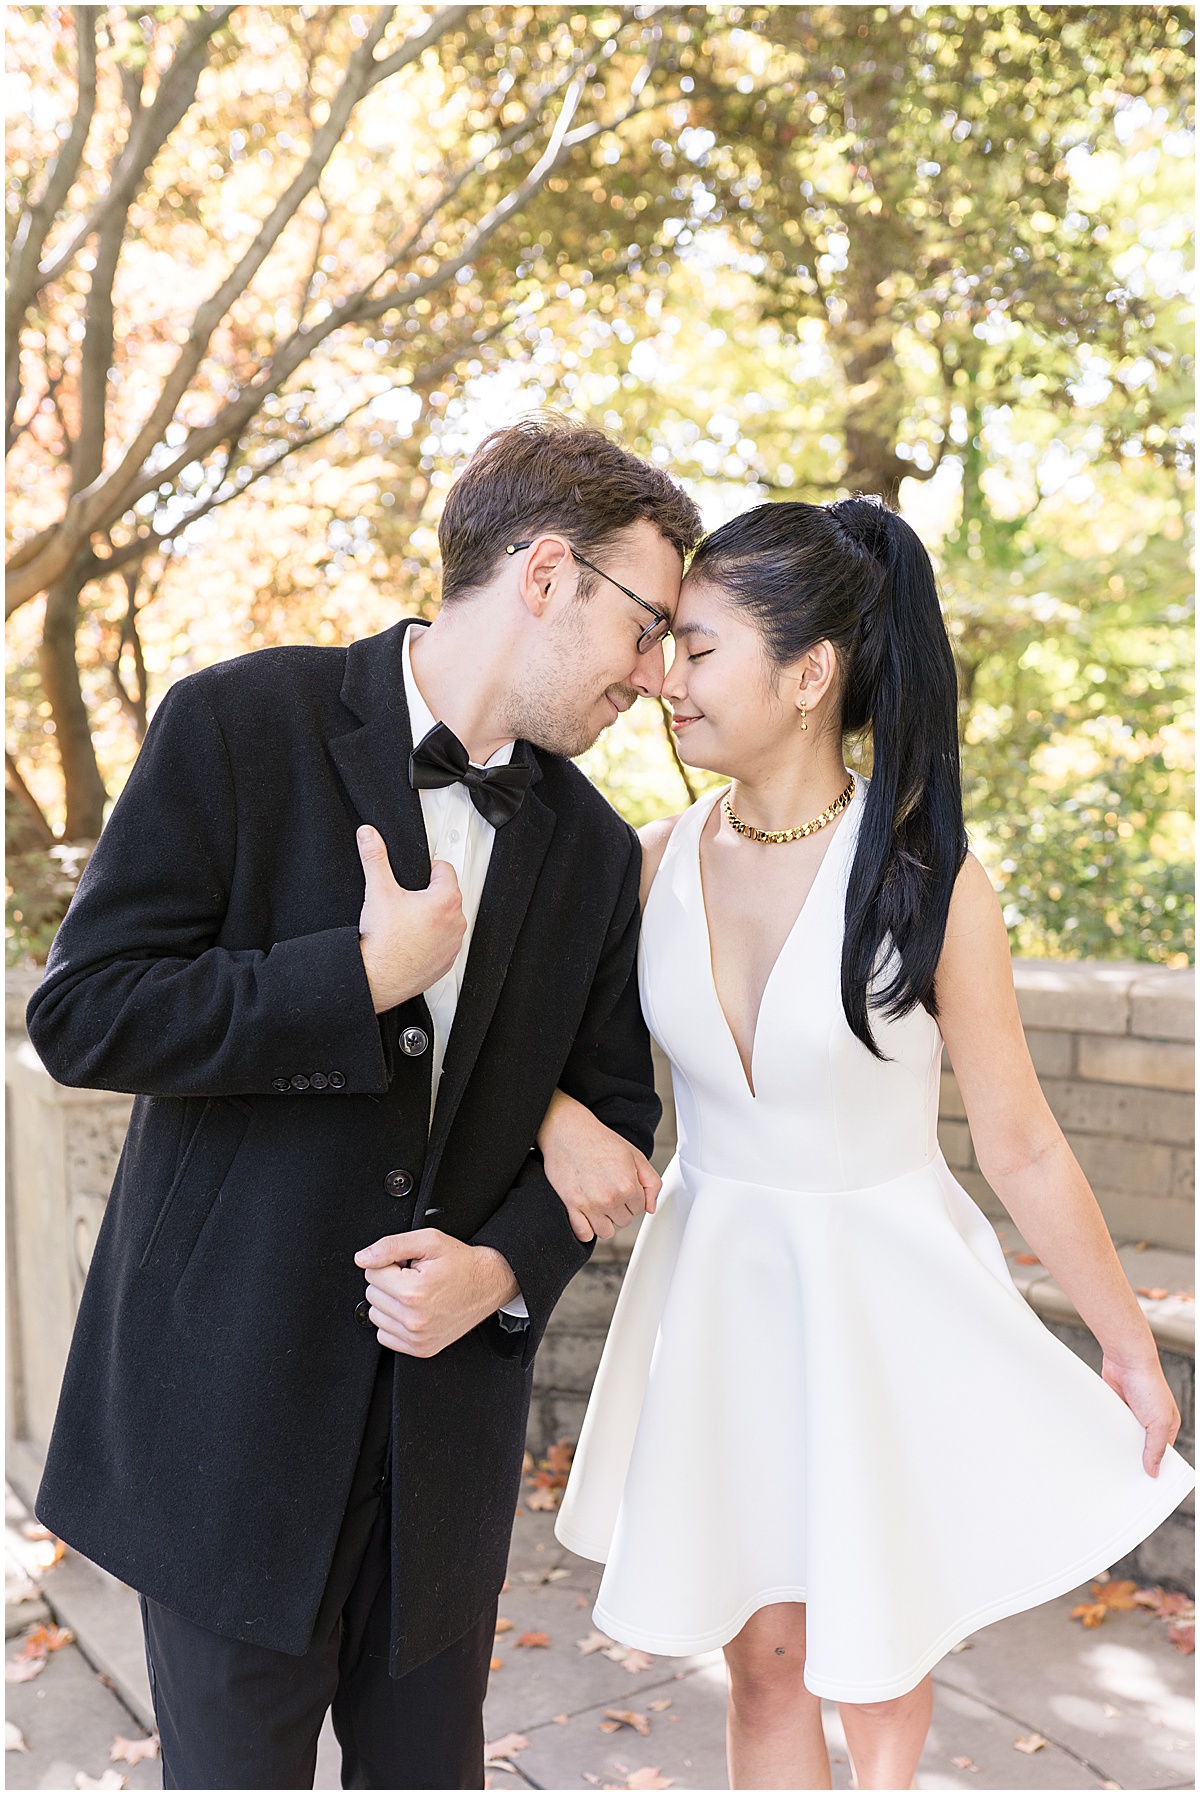 Bride to be showcases white satin dress during garden engagement photos at Newfields in Indianapolis